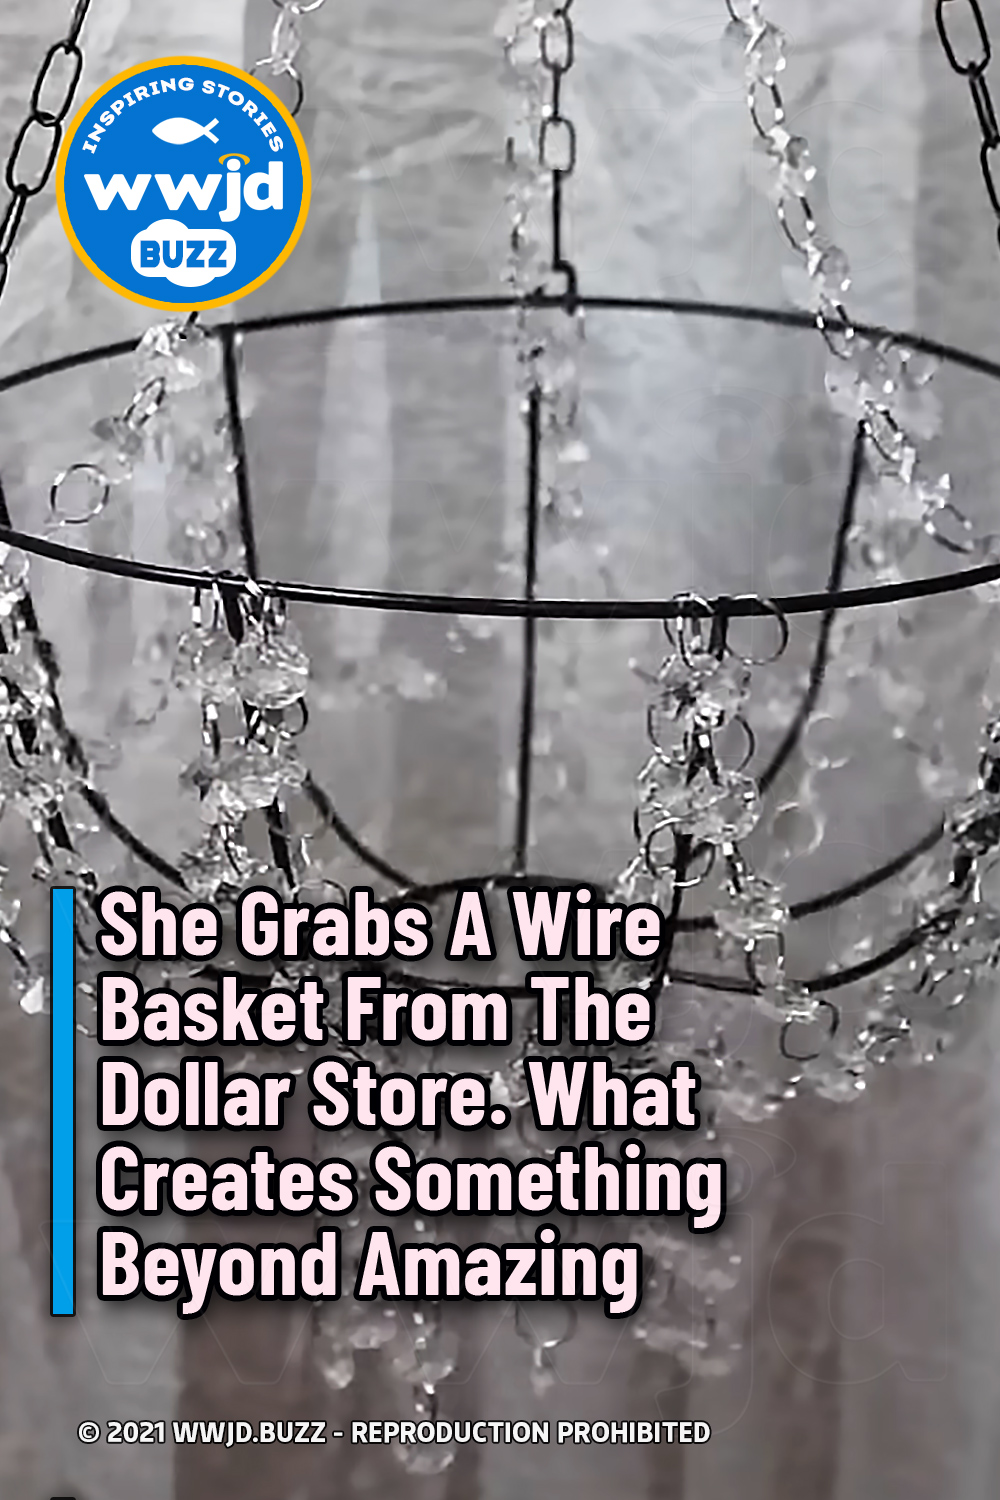 She Grabs A Wire Basket From The Dollar Store. What Creates Something Beyond Amazing